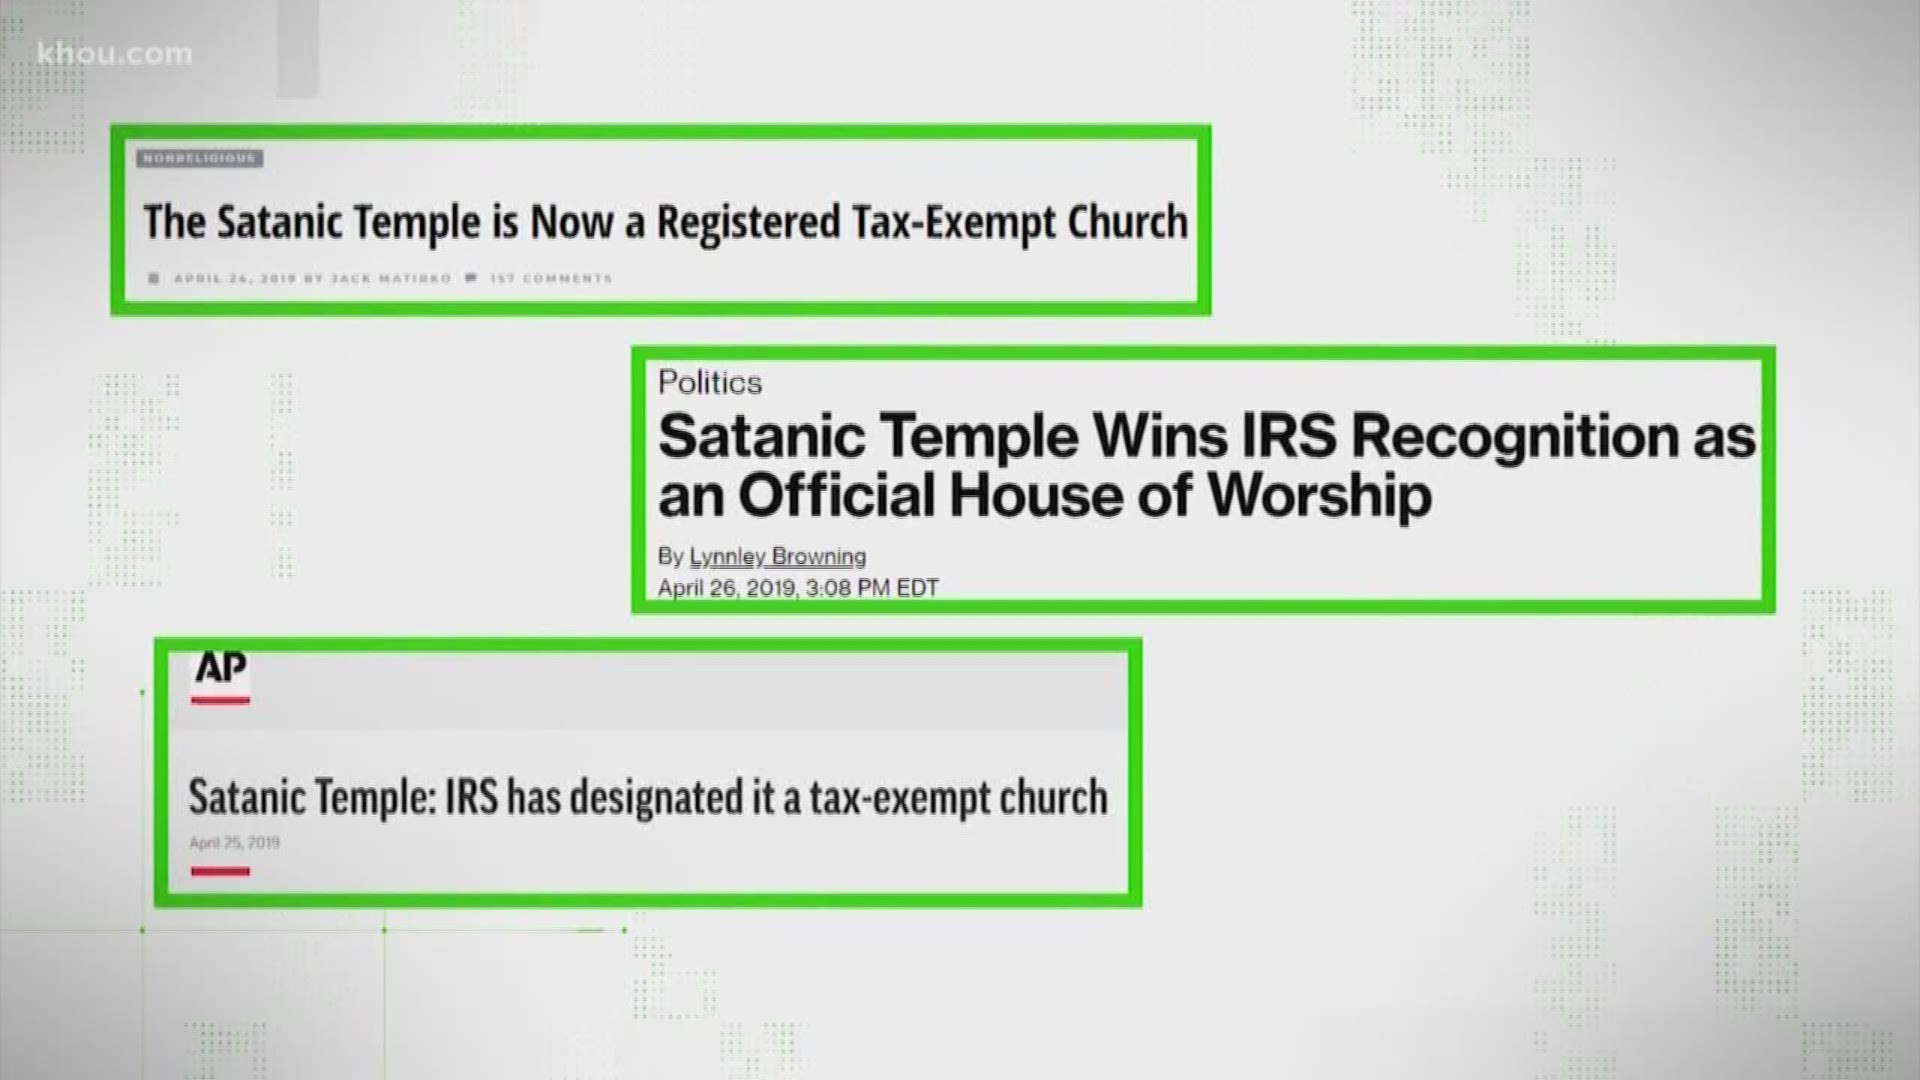 The headlines are clear. The Satanic Temple received IRS recognition and is now officially a church in the eyes of the revenue service. But is the story that simple?